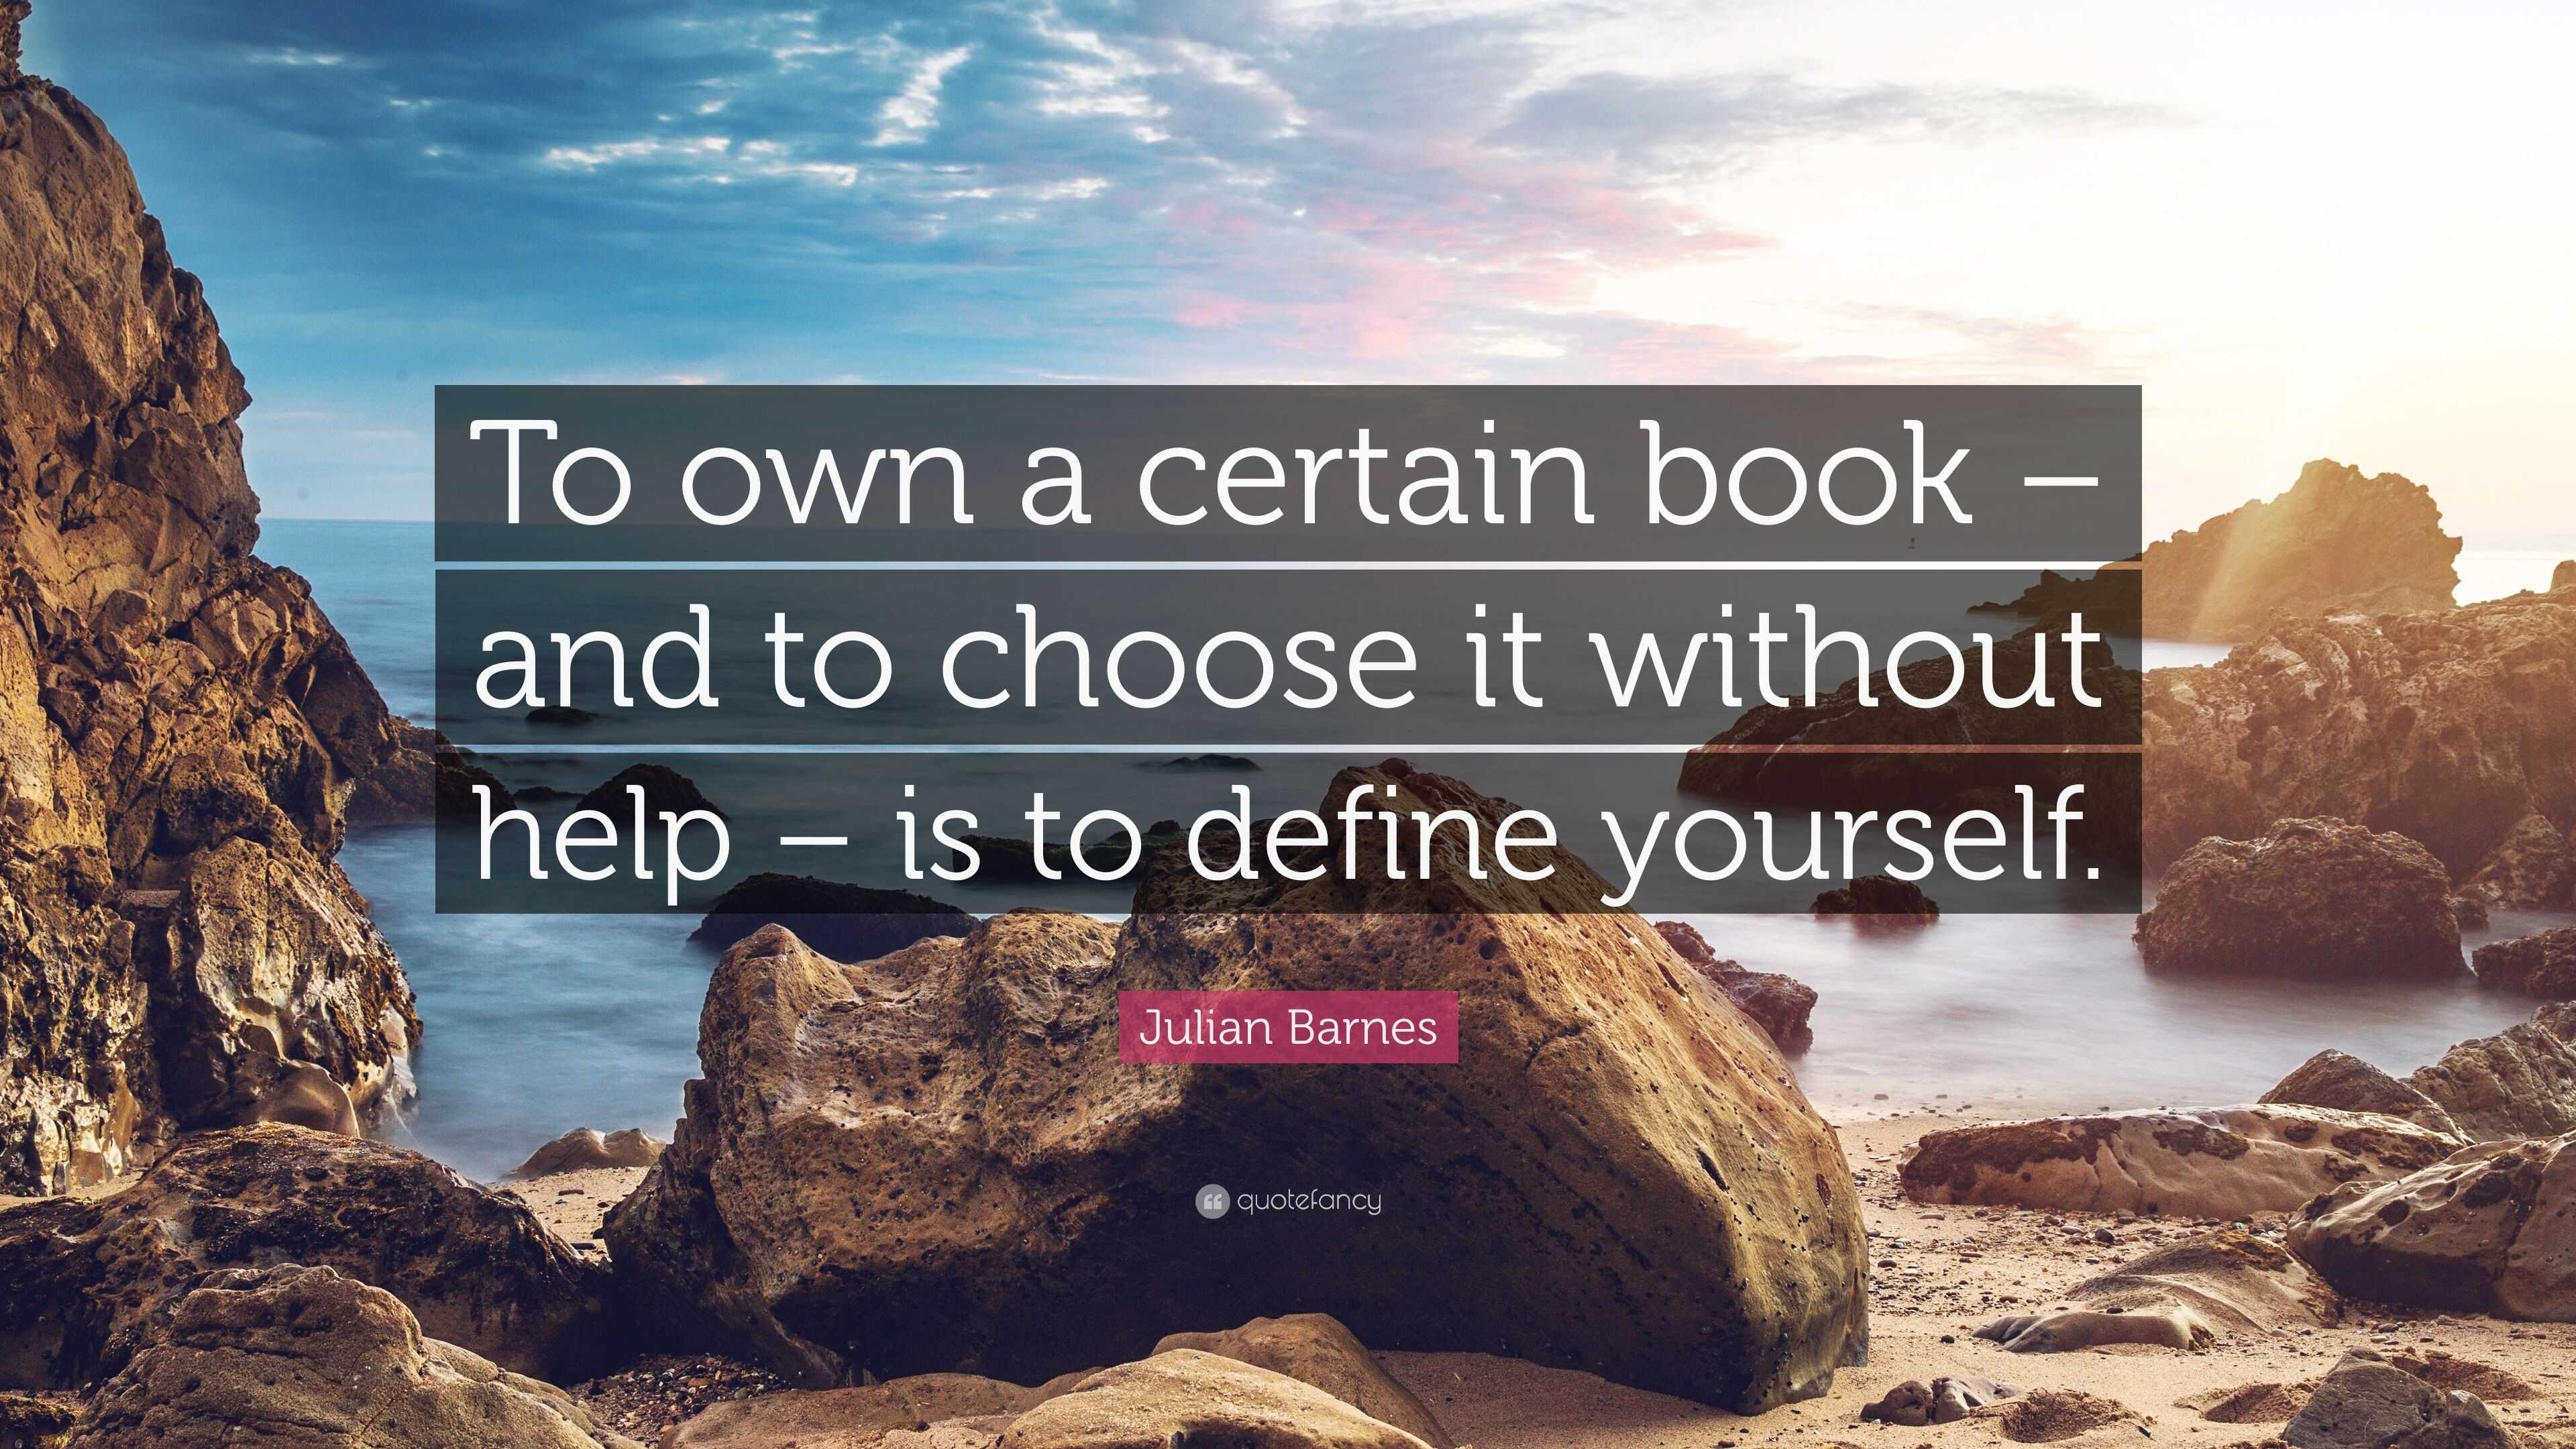 Julian Barnes Quote: “To own a certain book – and to choose it without ...